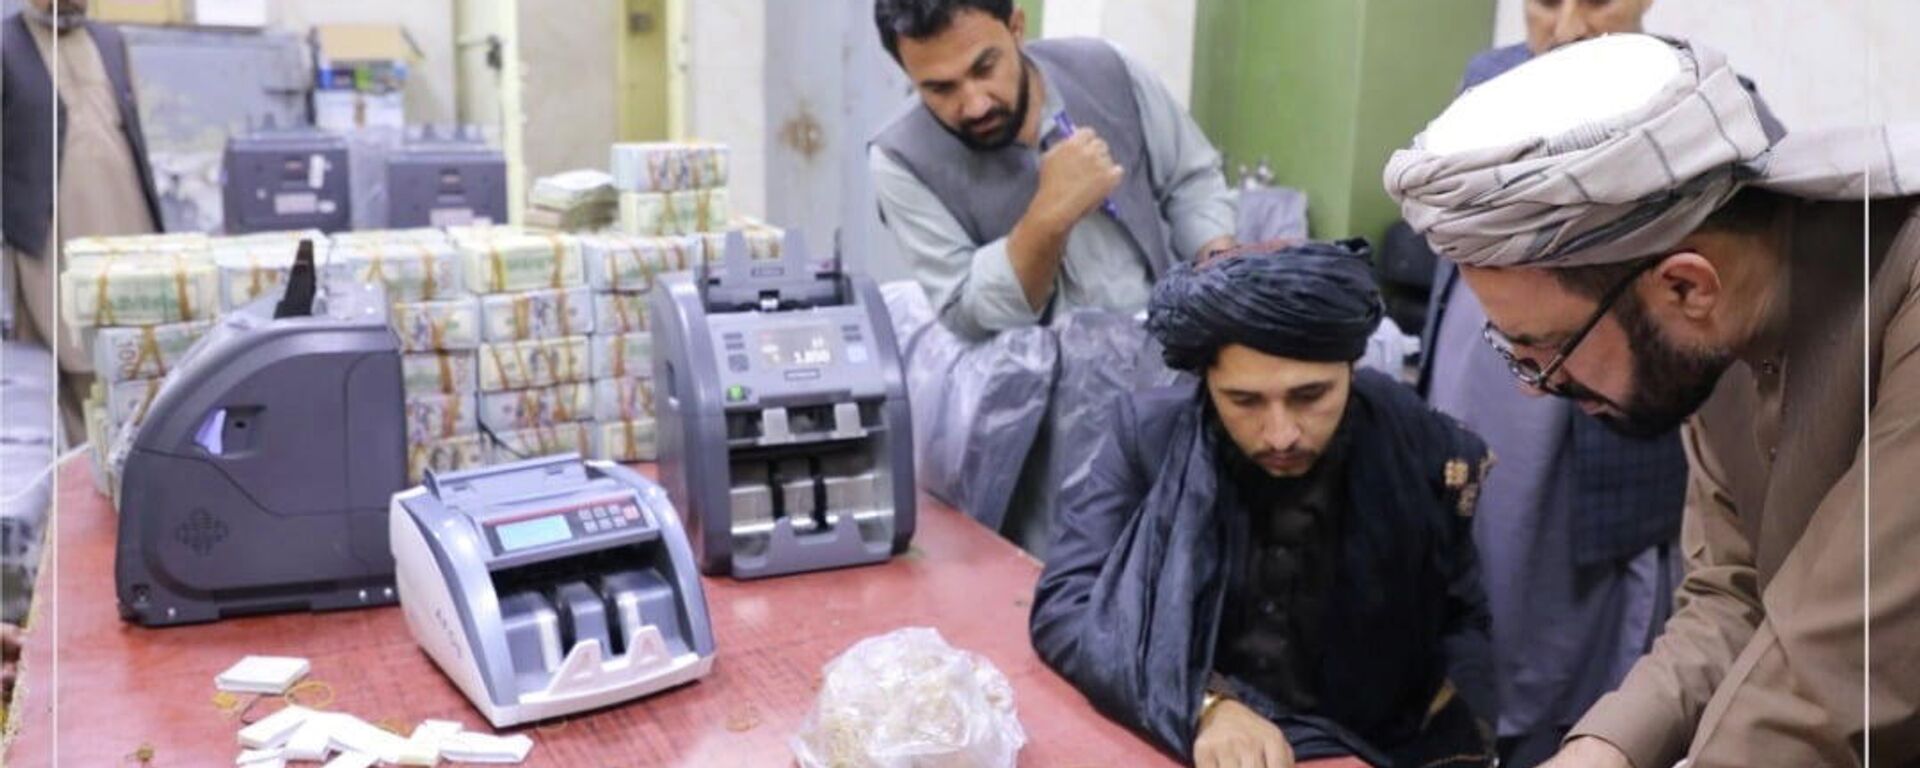 Men are pictured as Afghanistan's Taliban-controlled central bank seizes a large amount of money in cash and gold from former top government officials, including former vice president Amrullah Saleh, in Afghanistan, in this handout obtained by Reuters on September 15, 2021 - Sputnik International, 1920, 24.09.2021